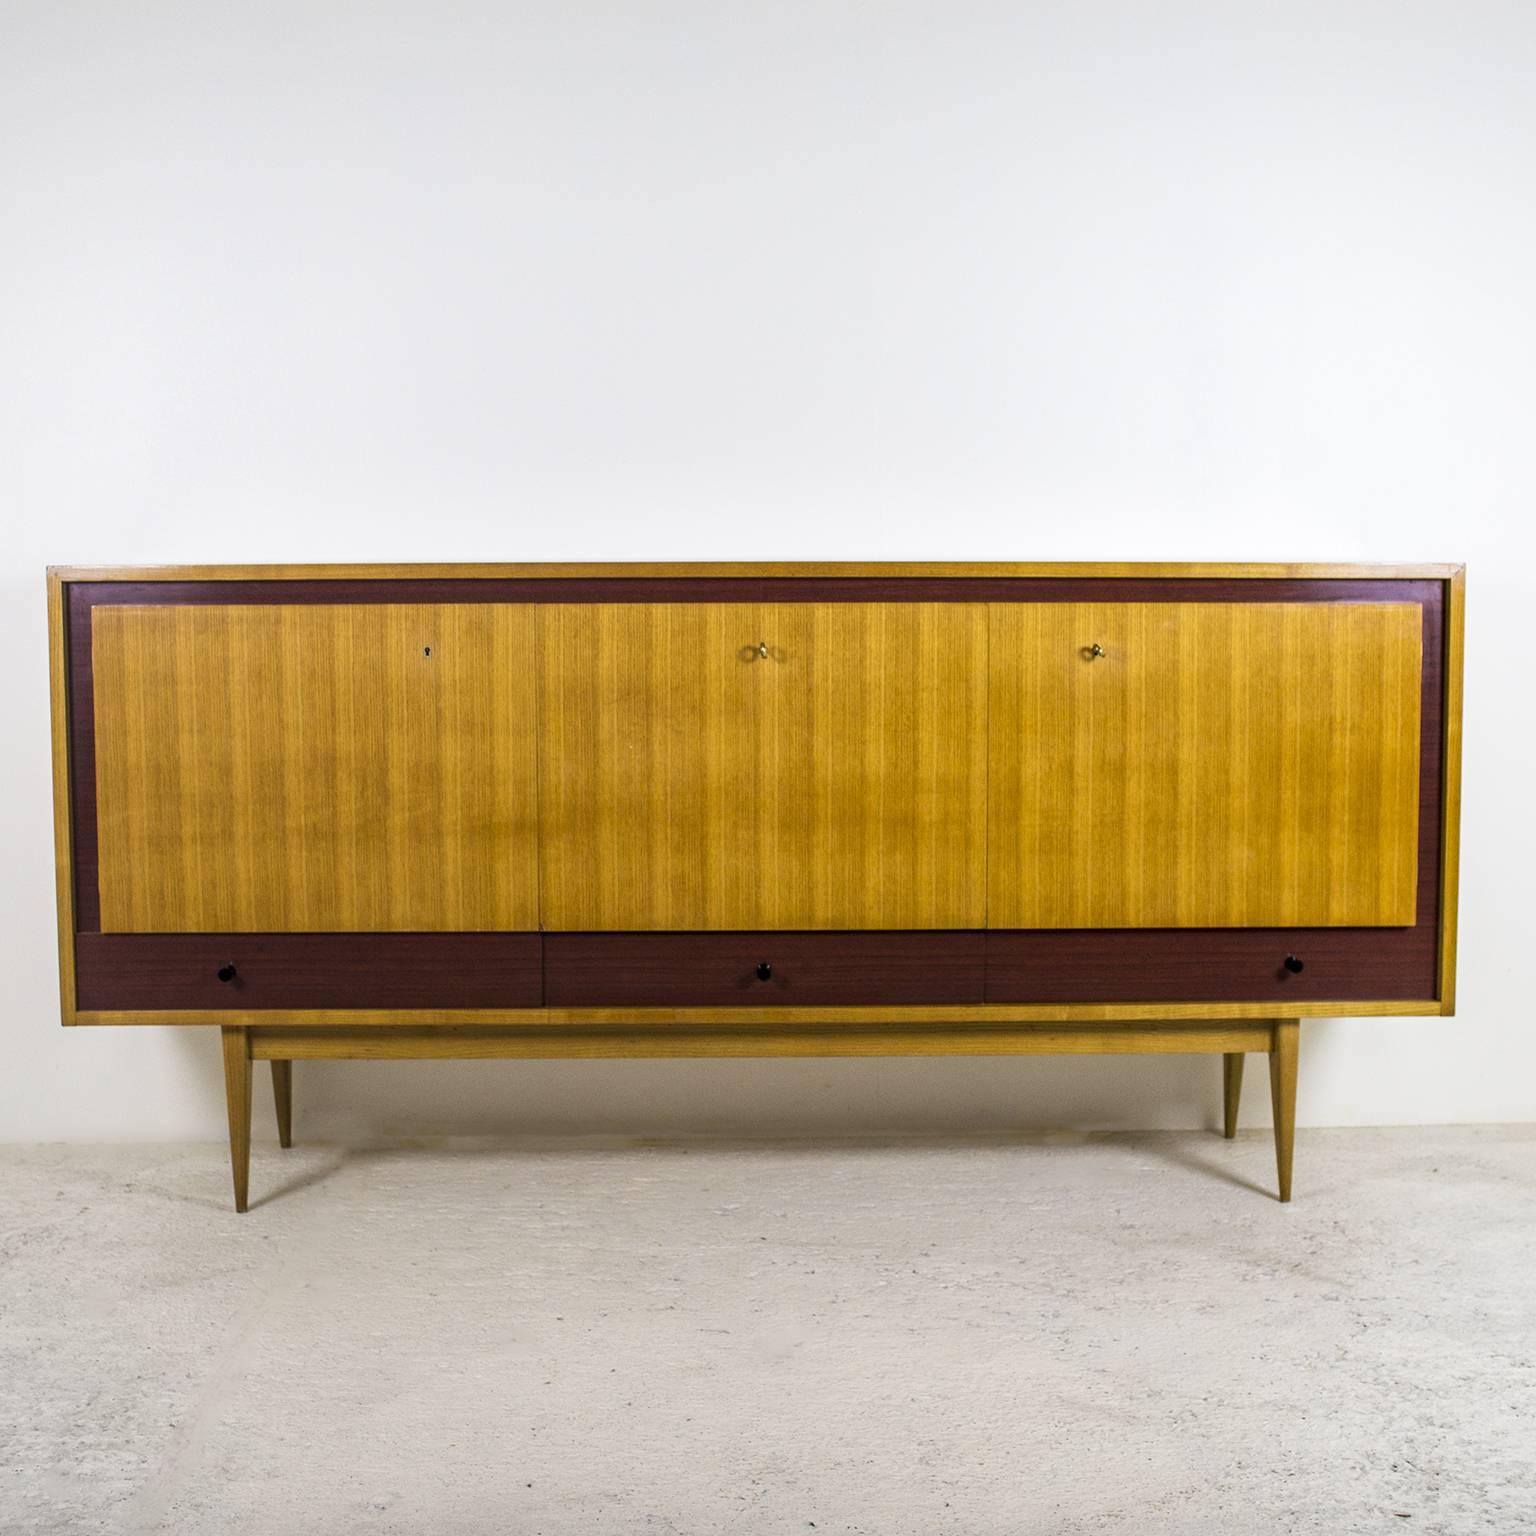 A 1950s sideboard by the French designer Charles Ramos. The frame is in light ash wood outlined by brown laminate to create a beautiful contrast. The piece of furniture, resting on four sabre legs, is made of two opening doors on the sides, a